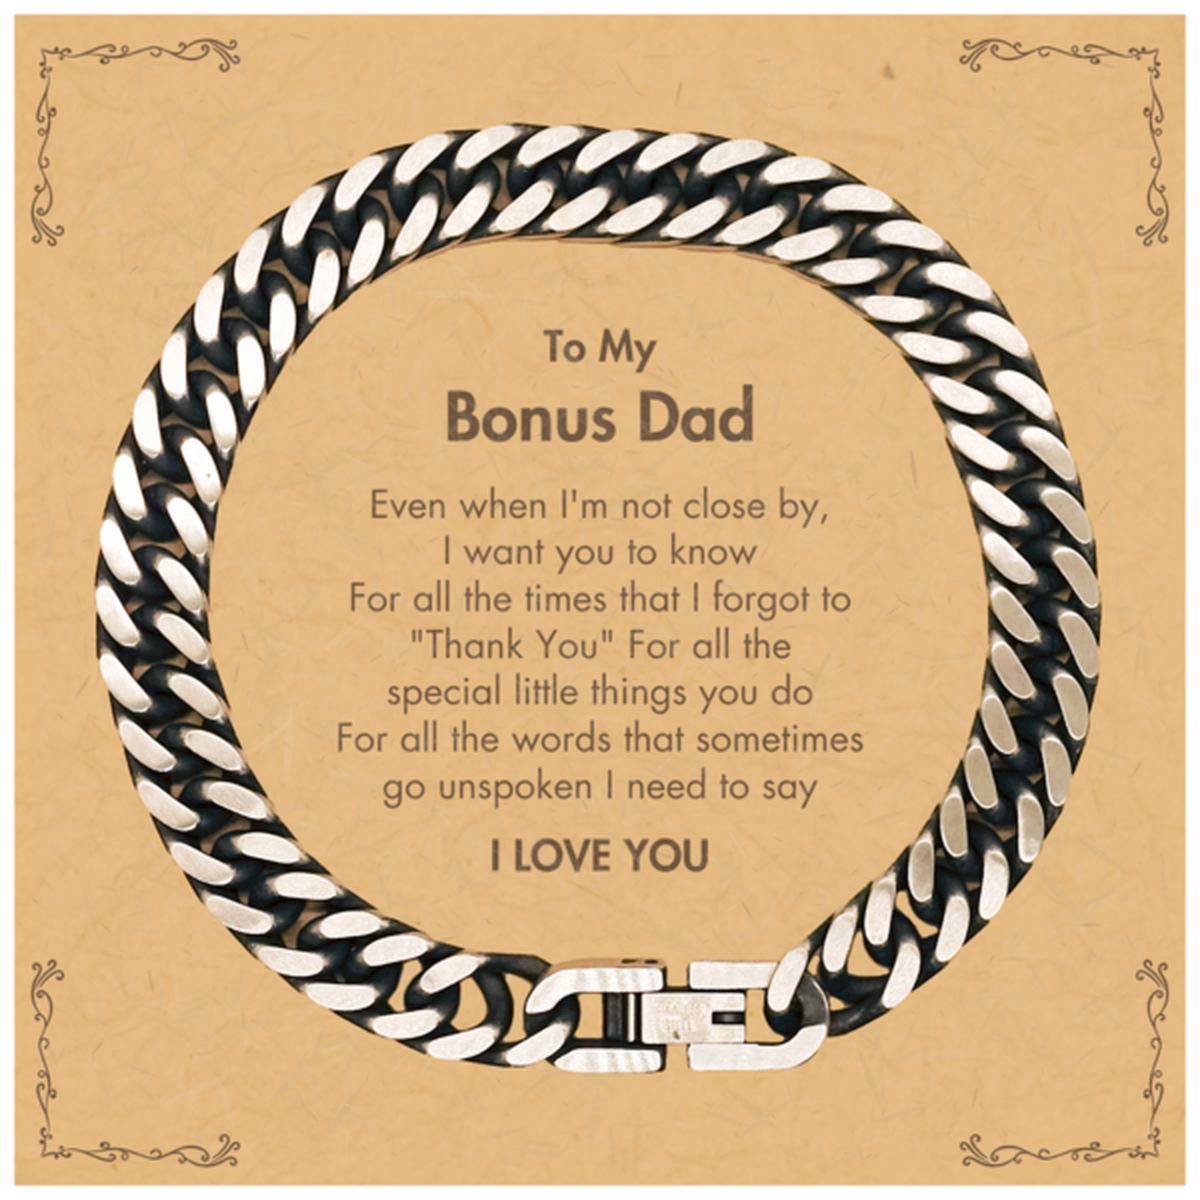 Thank You Gifts for Bonus Dad, Keepsake Cuban Link Chain Bracelet Gifts for Bonus Dad Birthday Mother's day Father's Day Bonus Dad For all the words That sometimes go unspoken I need to say I LOVE YOU